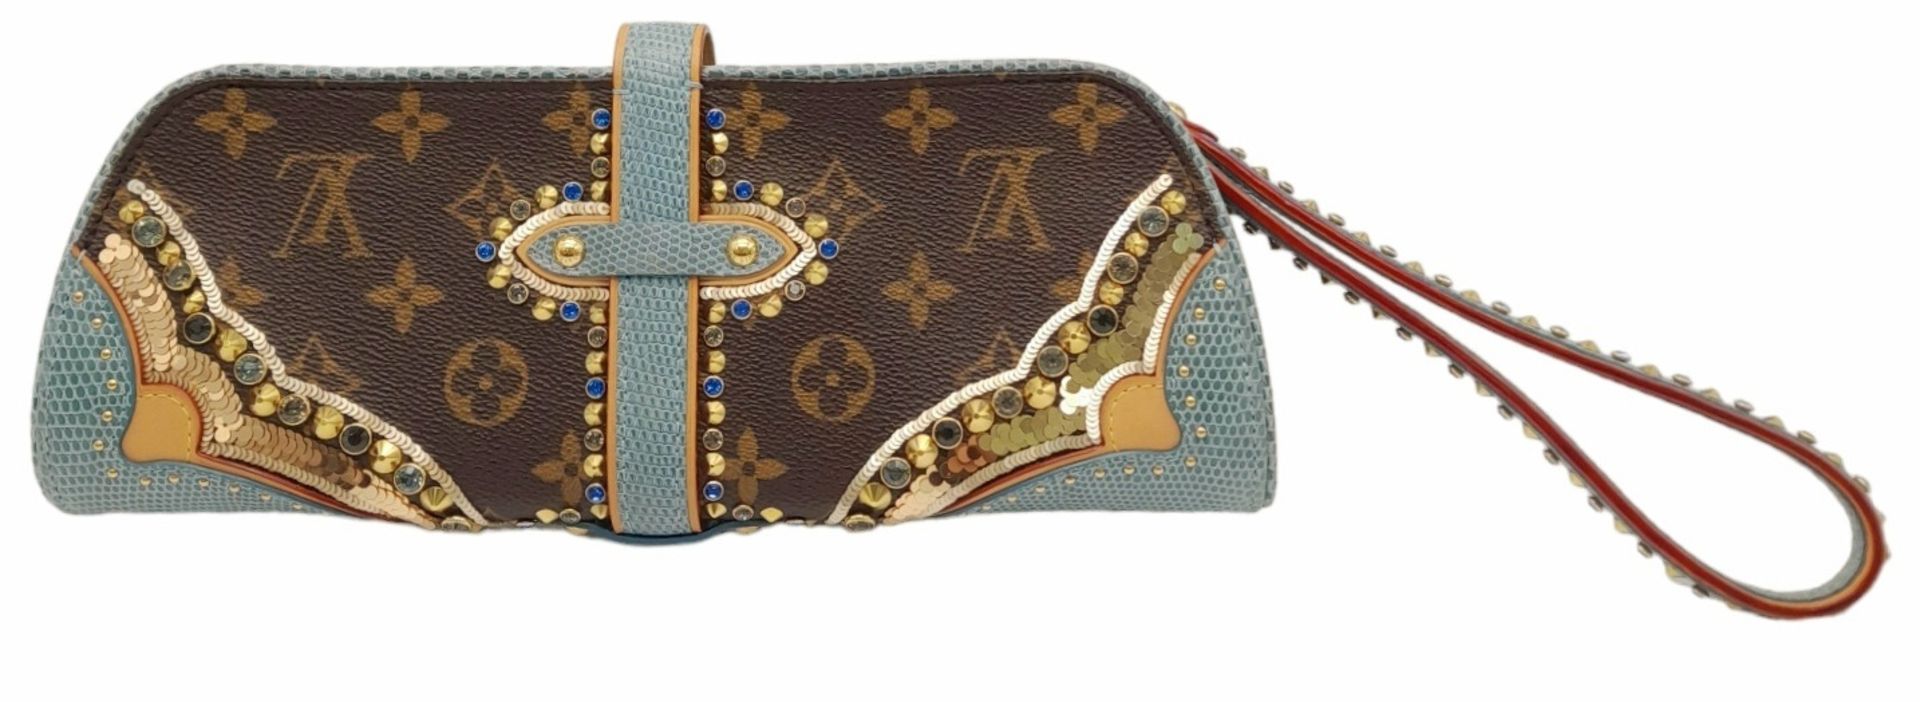 A Louis Vuitton Monogram Les Extraordinaires Clutch Bag. Leather exterior with stone and stud - Image 13 of 15